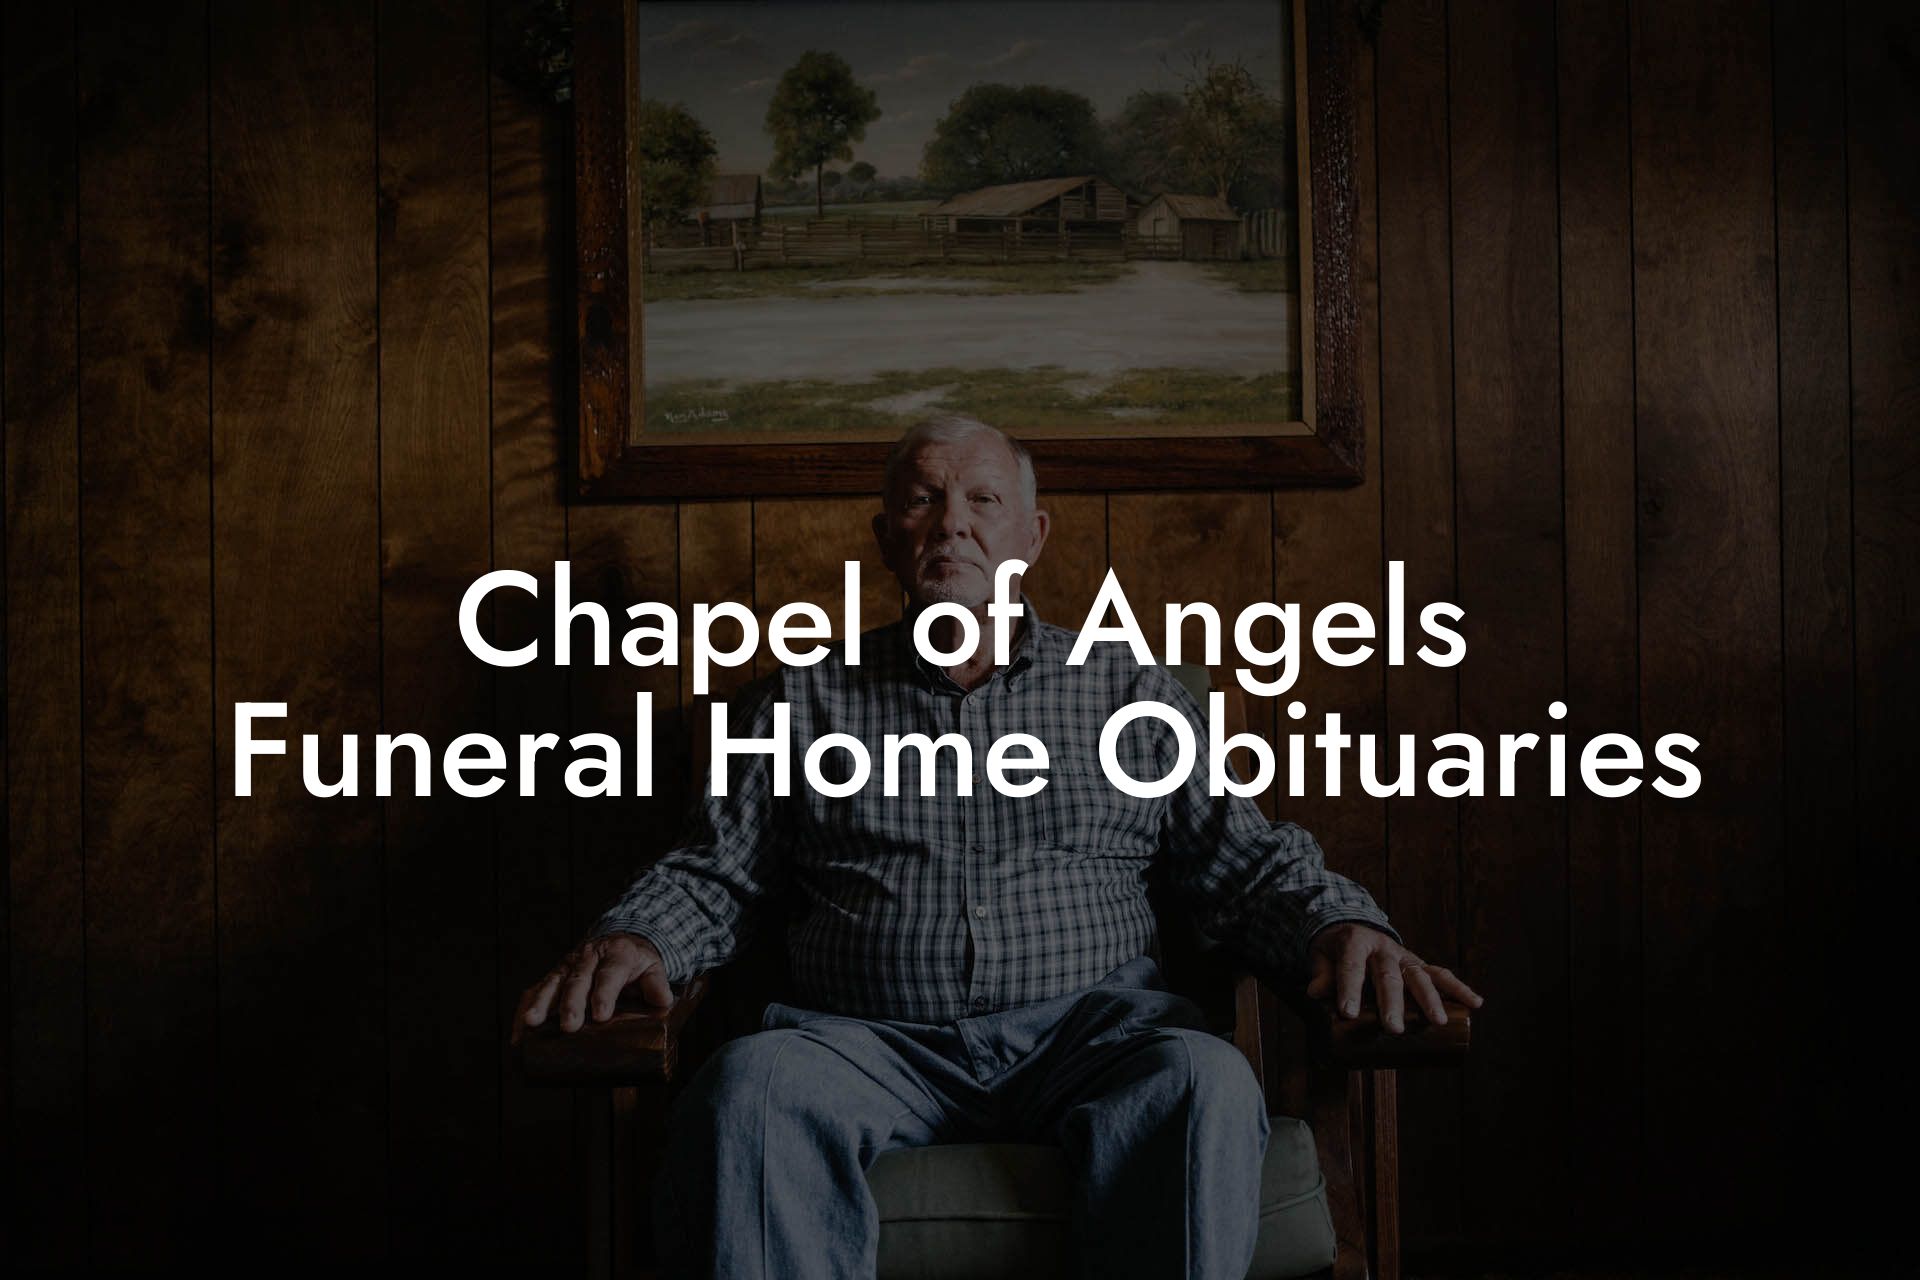 Chapel of Angels Funeral Home Obituaries - Eulogy Assistant